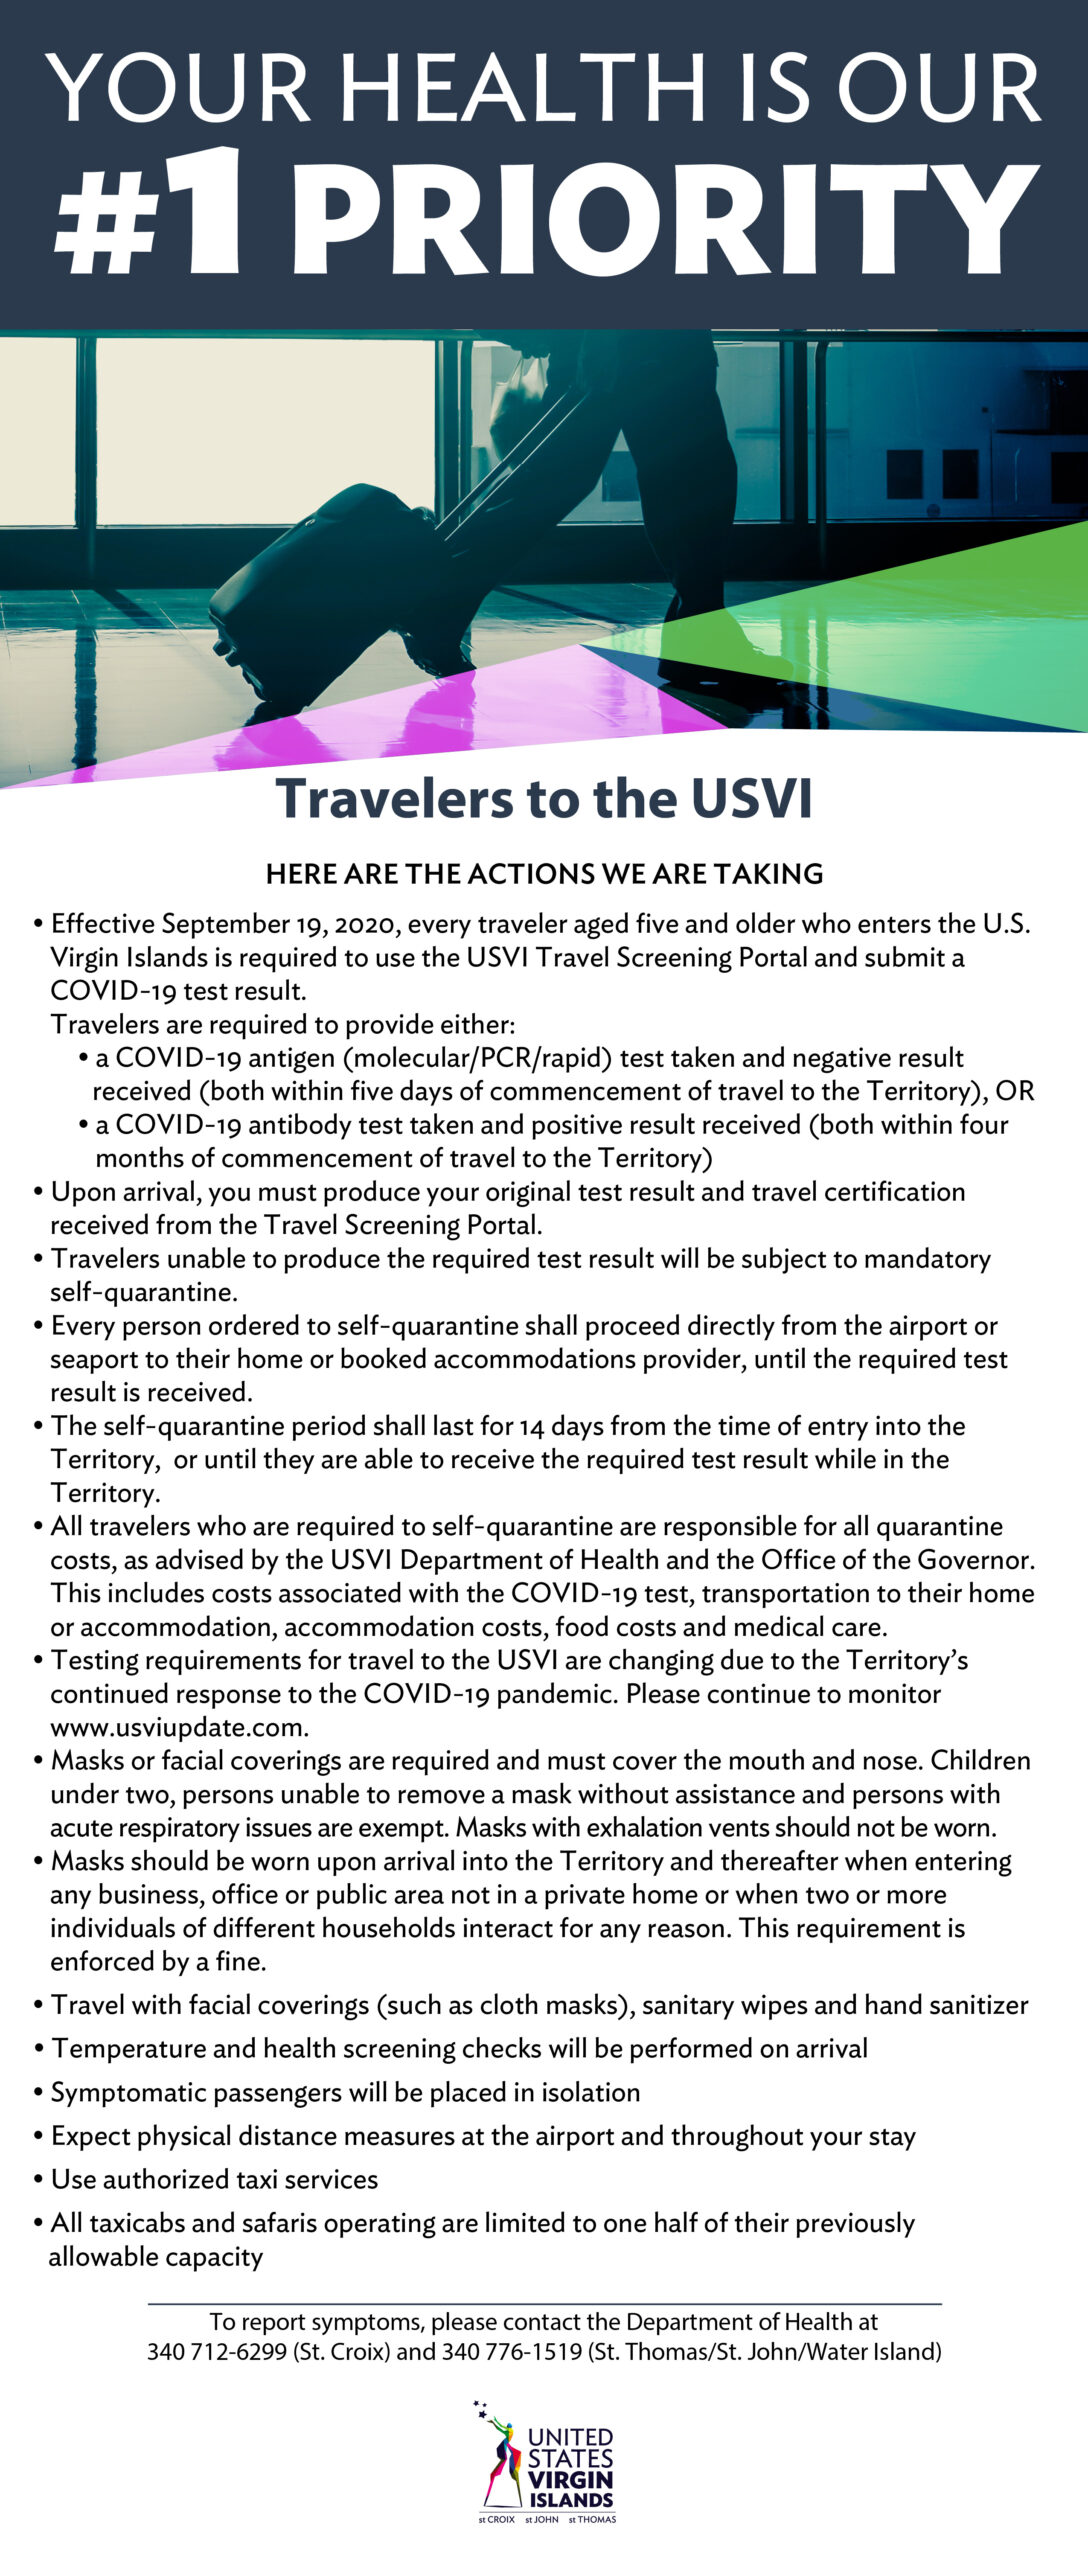 COVID19 Travel Advisories for the US Virgin Islands